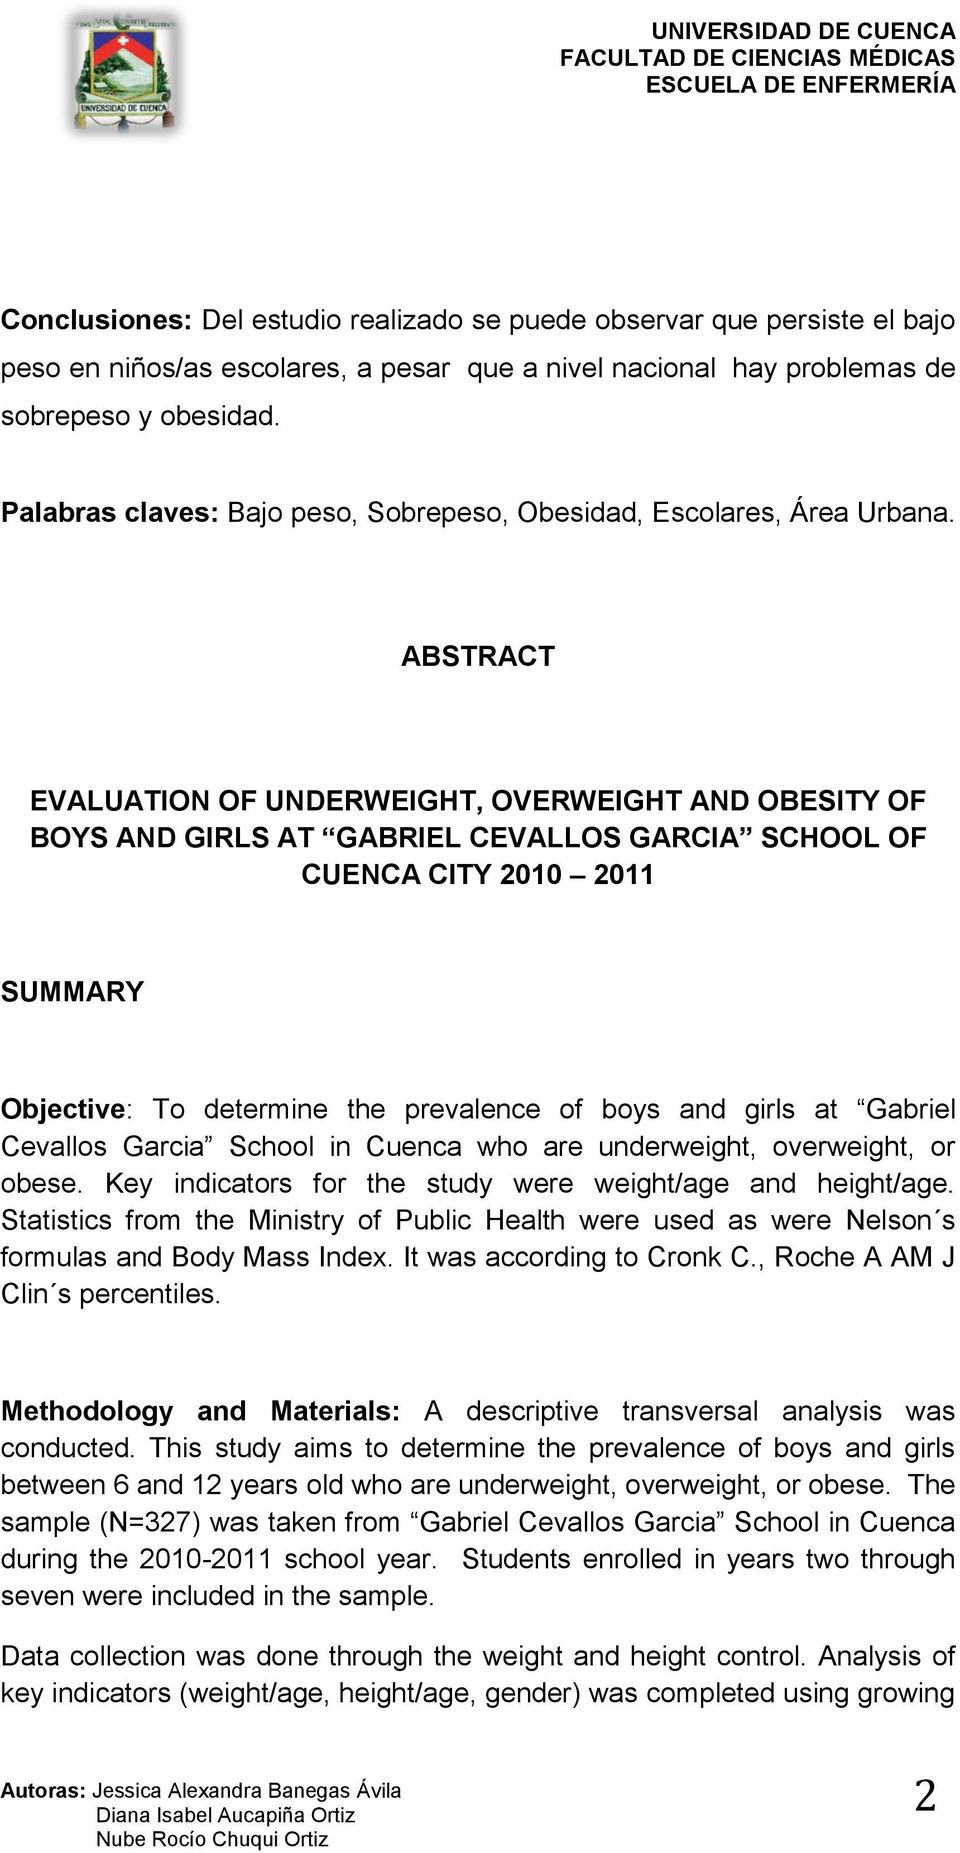 ABSTRACT EVALUATION OF UNDERWEIGHT, OVERWEIGHT AND OBESITY OF BOYS AND GIRLS AT GABRIEL CEVALLOS GARCIA SCHOOL OF CUENCA CITY 21 211 SUMMARY Objective: To determine the prevalence of boys and girls